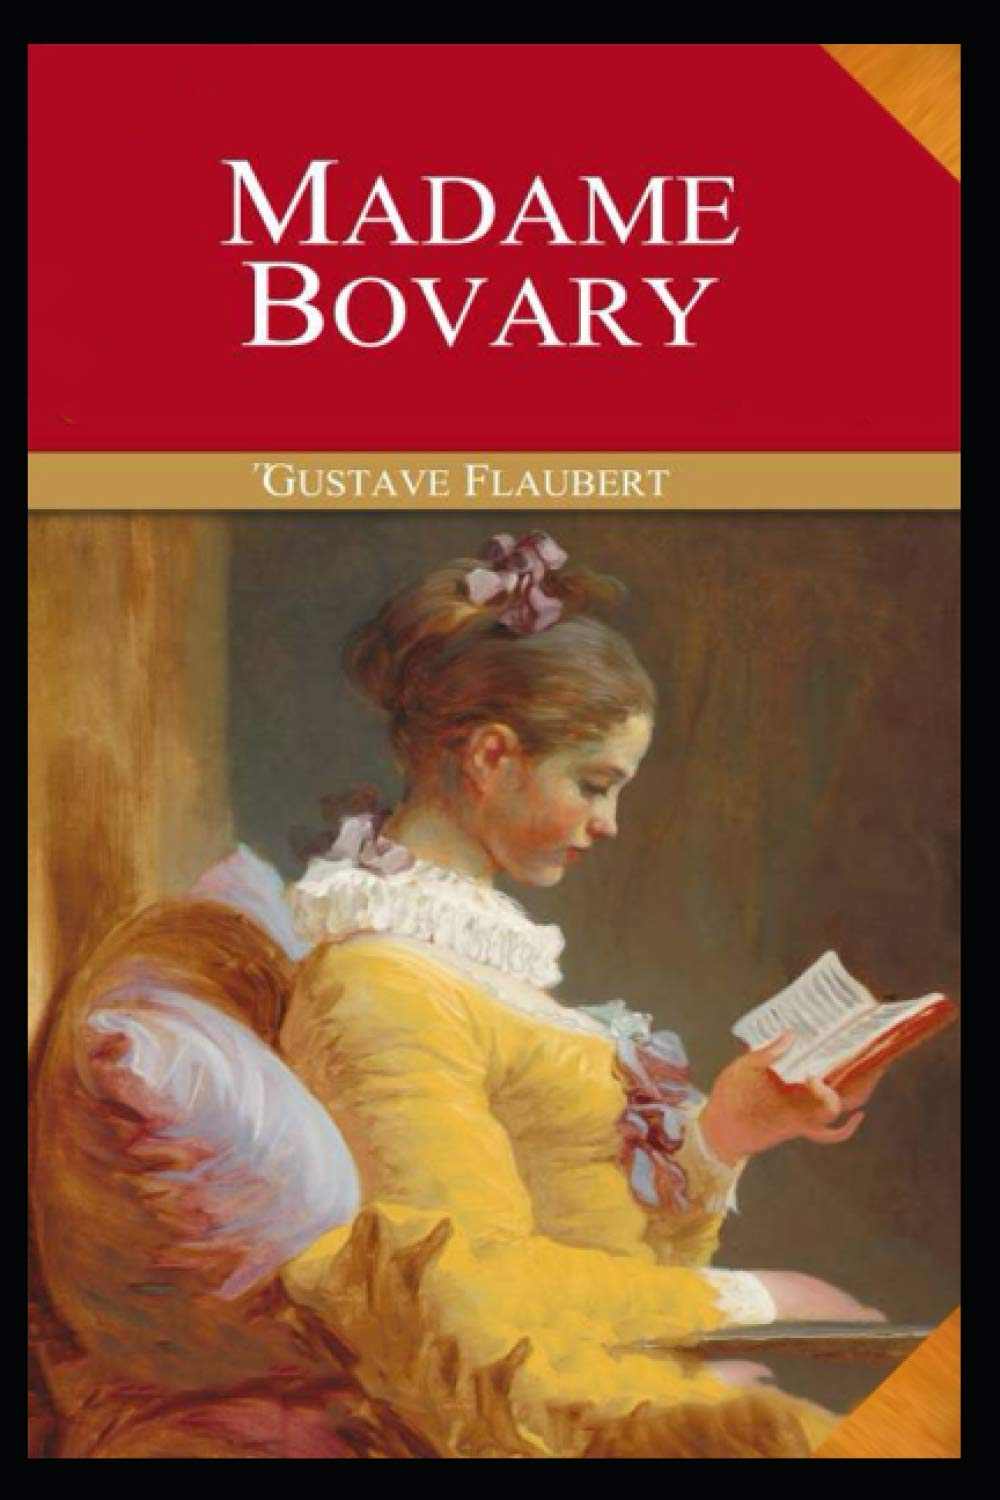 images/MadameBovary.jpg